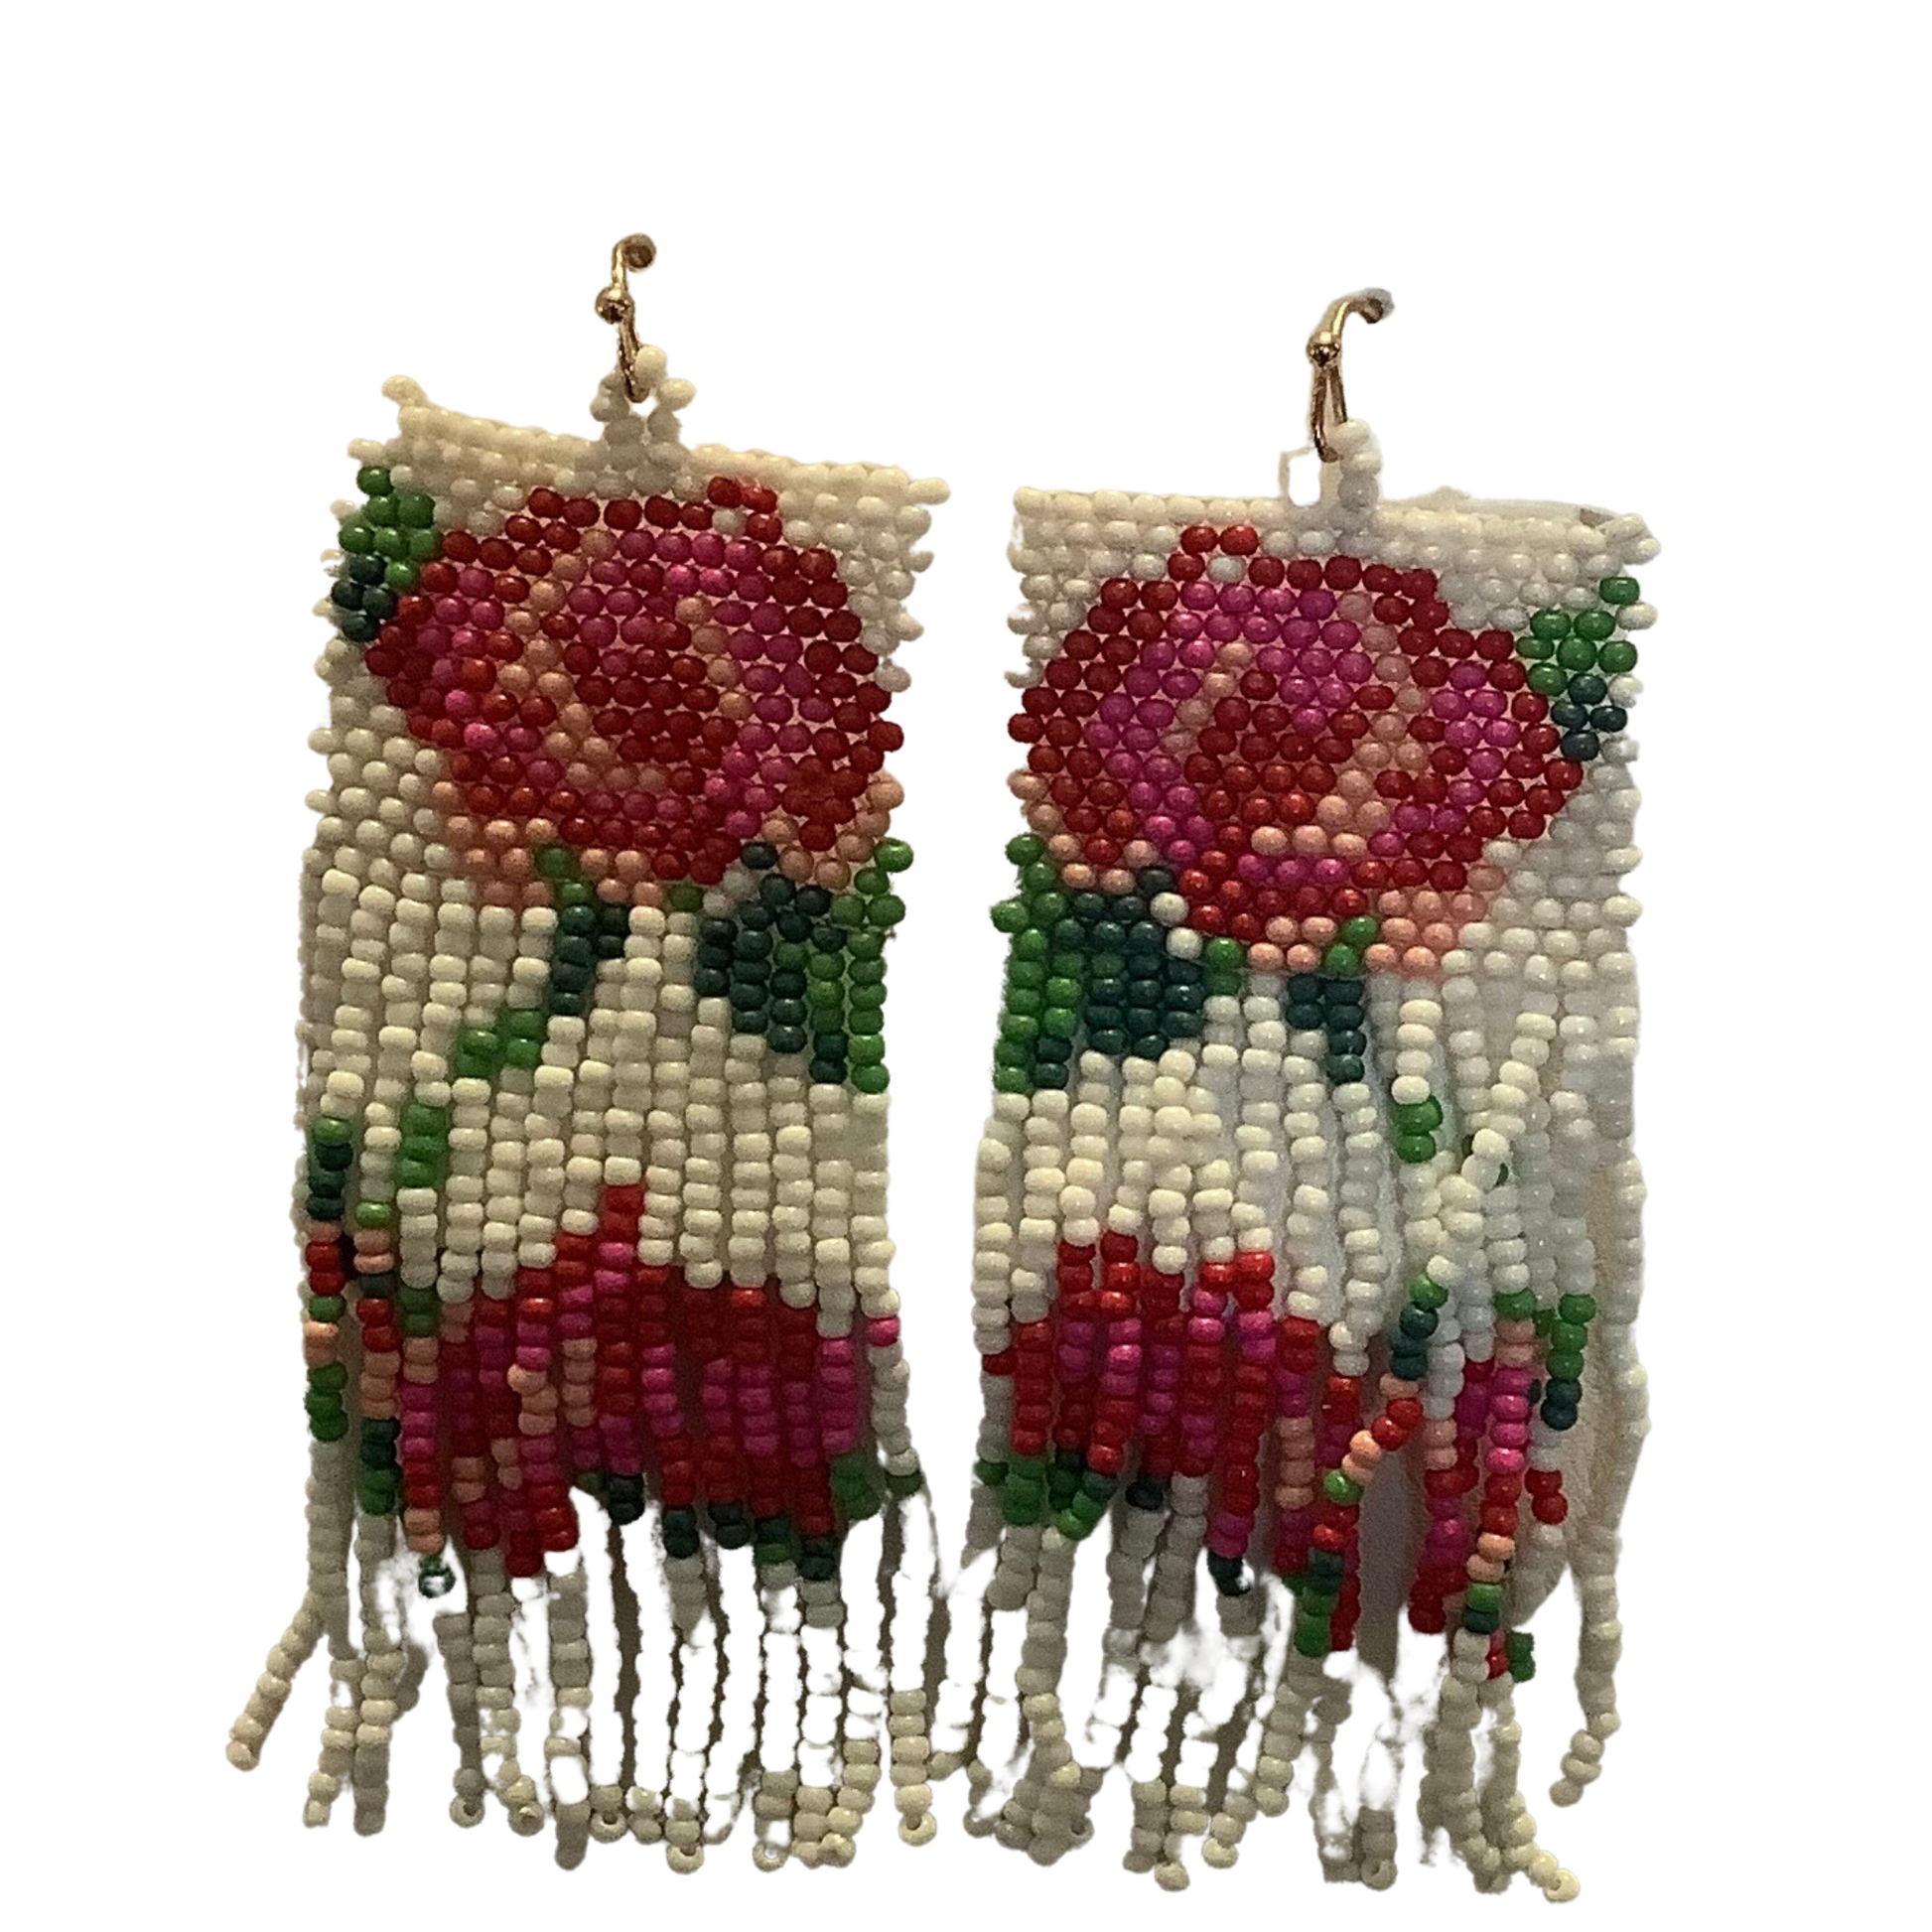 These Beaded Rose Dangle Earrings feature a unique beaded design with a rose pattern, crafted using delicate stands of beads. A chic and elegant touch, these earrings will add style and sophistication to any look.